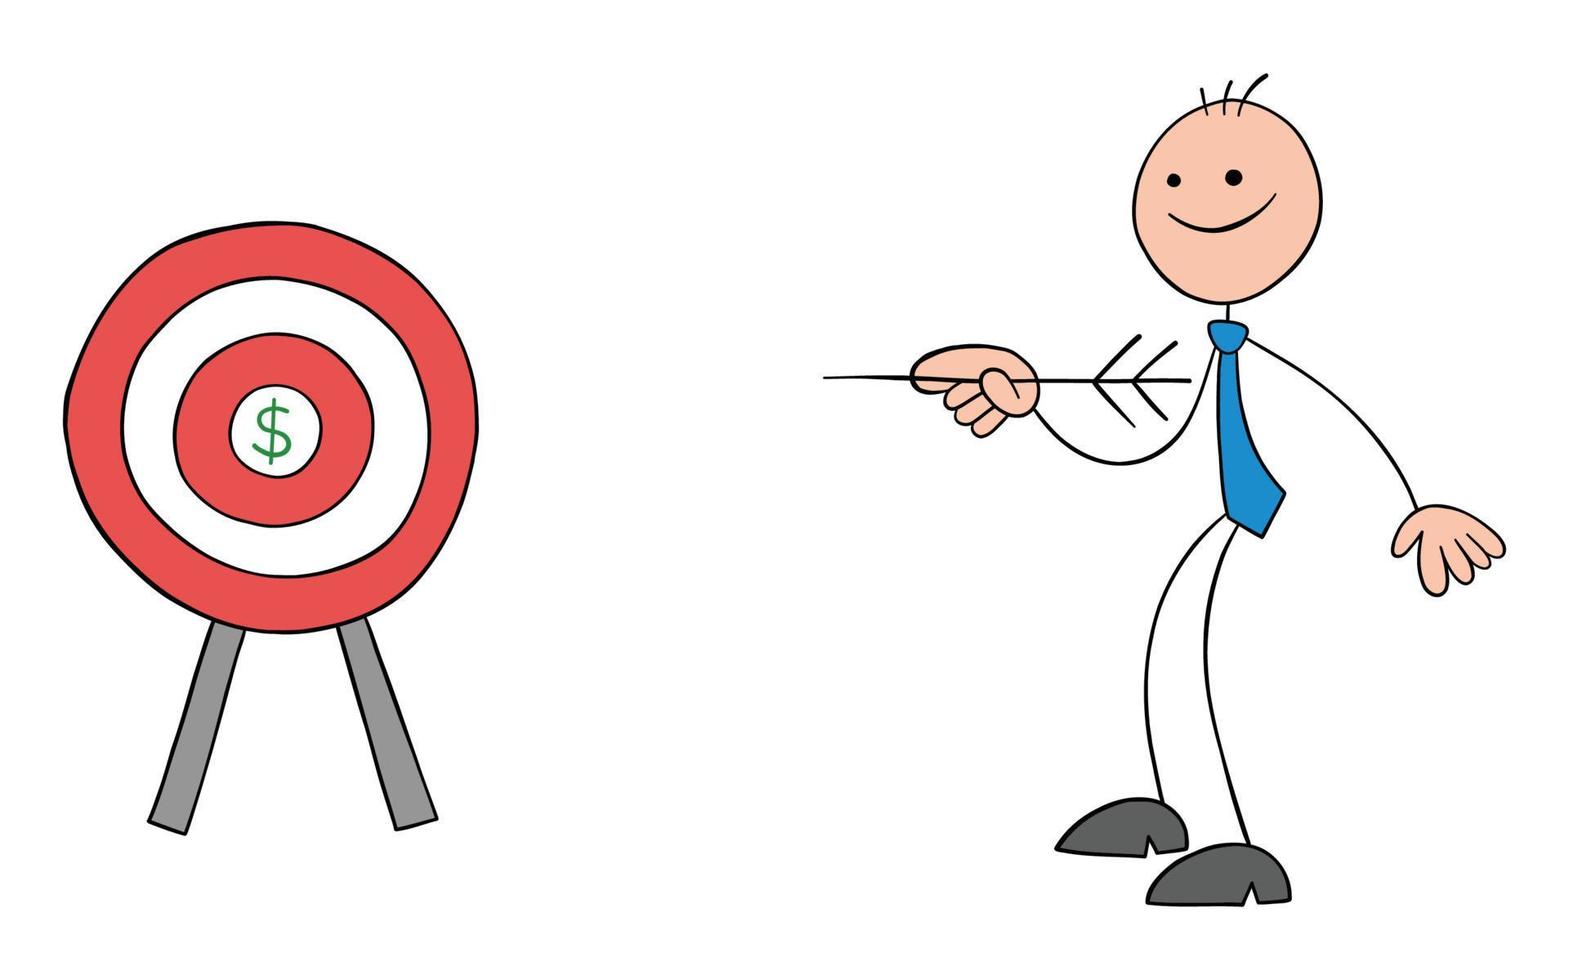 Stickman businessman with bulls eye and dollr symbol in the center and holding an arrow hand drawn outline cartoon vector illustration.